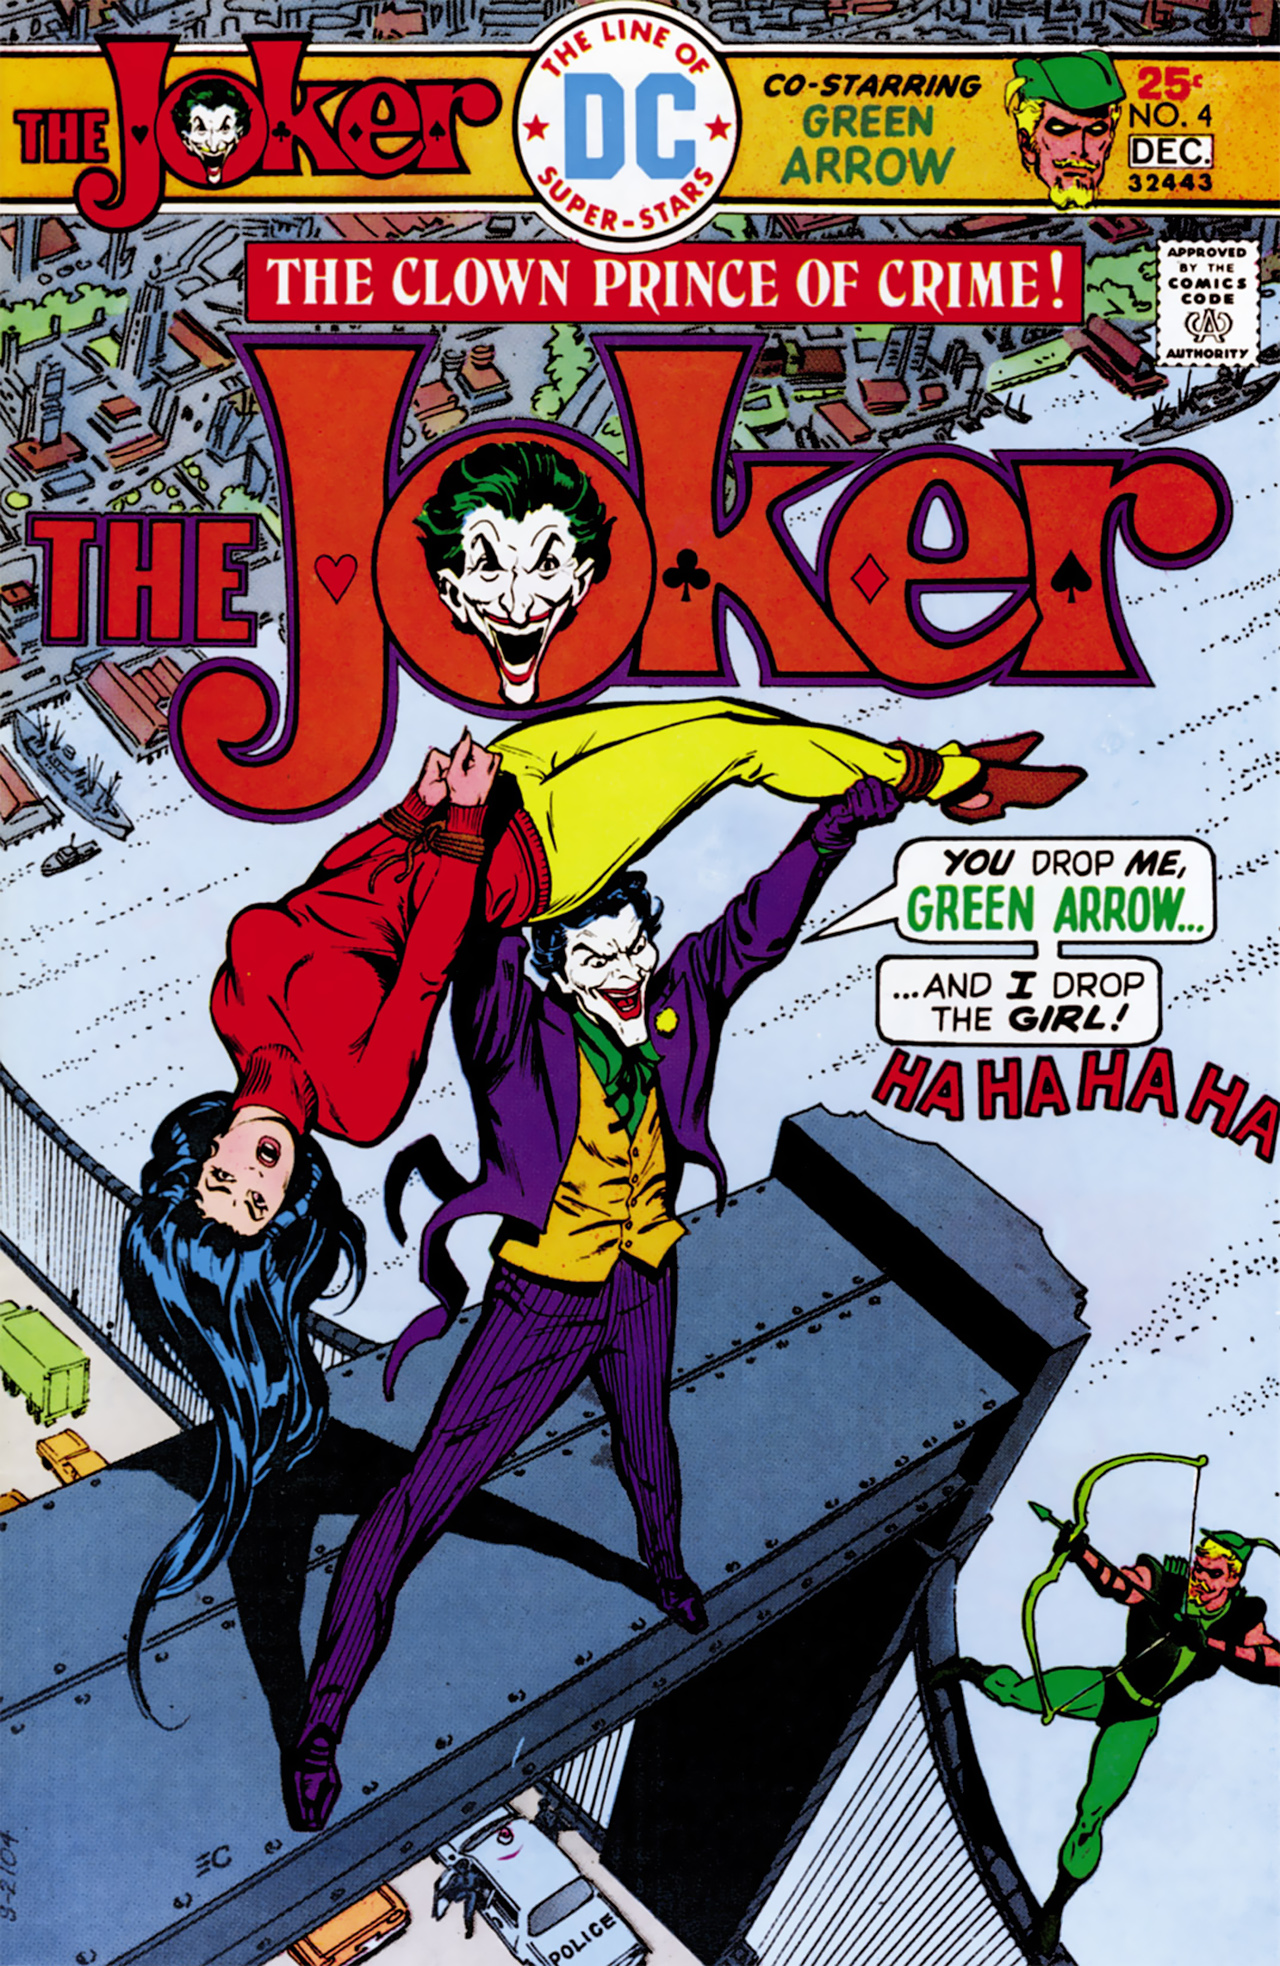 The Joker (1975-1976 + 2019): Chapter 4 - Page 1